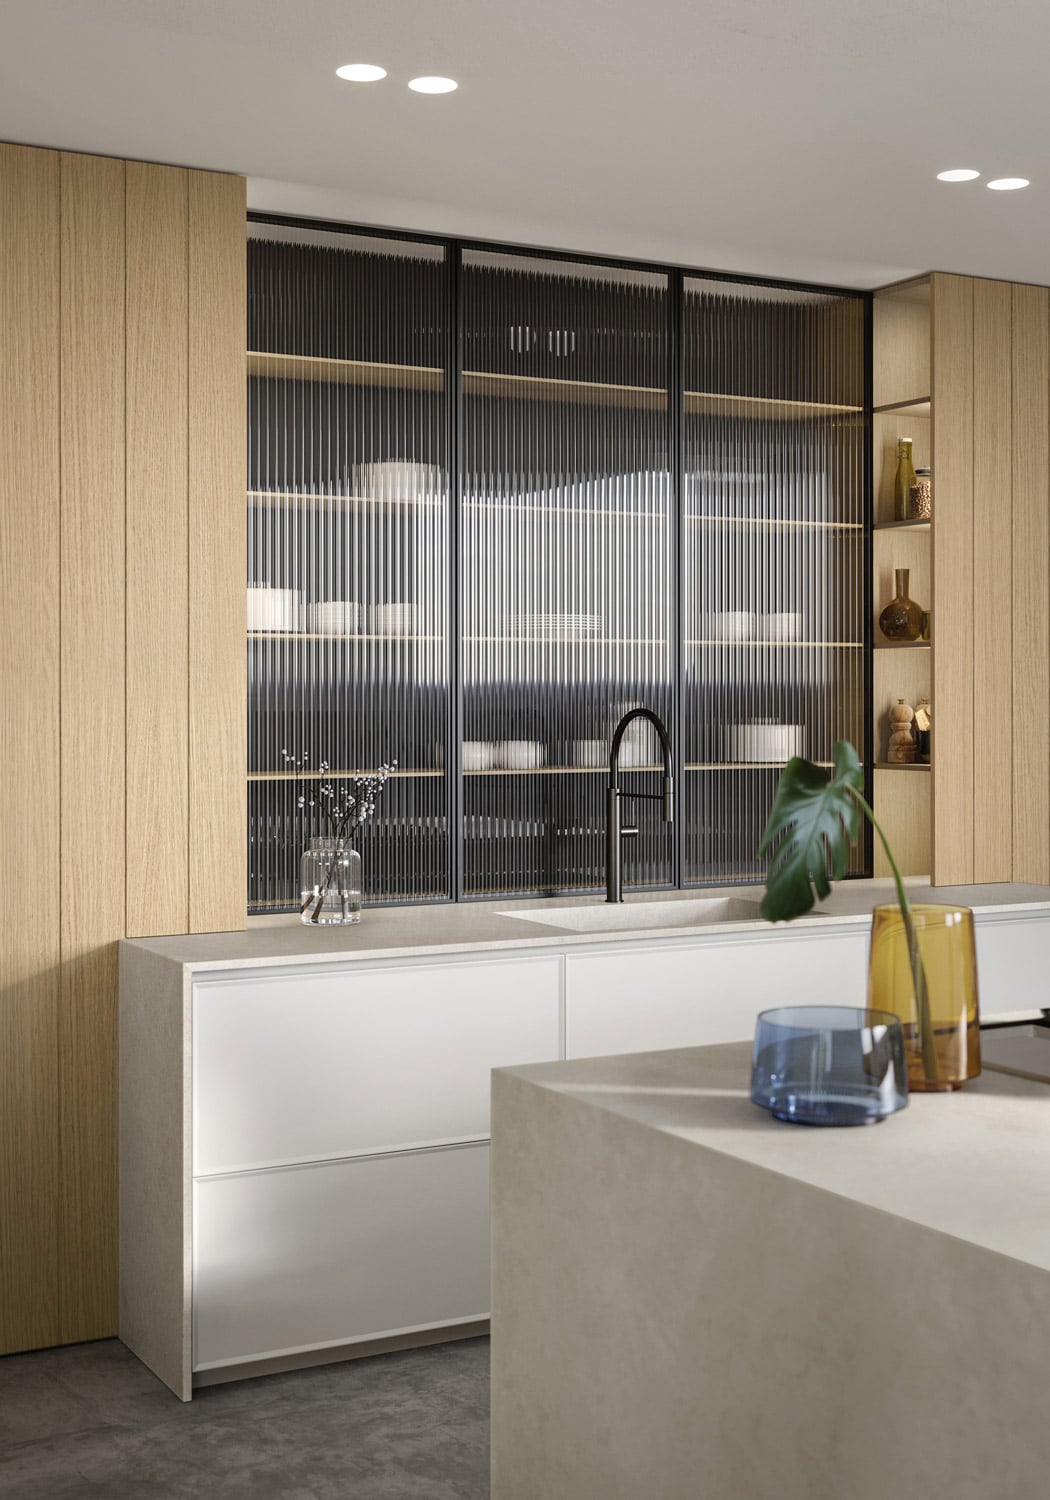 To both sides of the ribbed glass panel, integrated within the structure of the tall units, are LED-lit niches with open shelves.